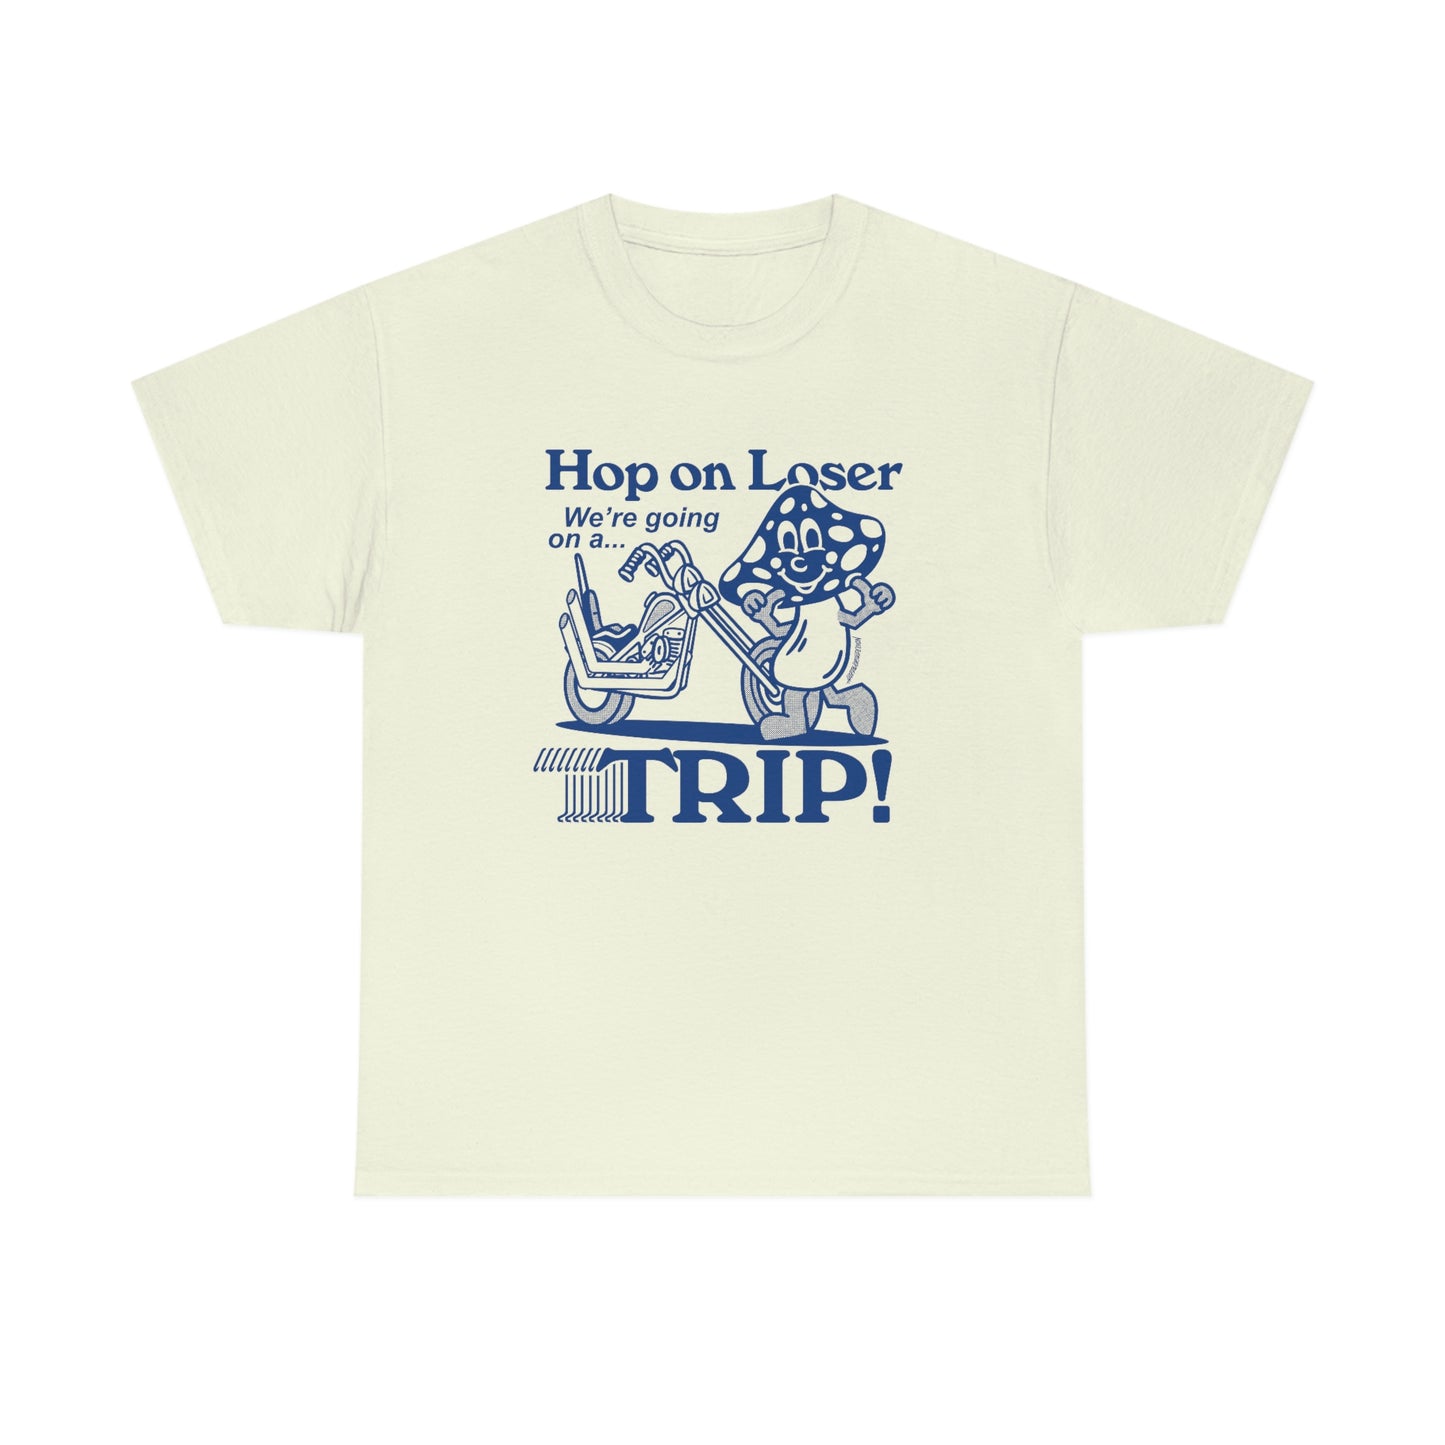 Hop on loser, we're going on a Trip - Unisex Tee